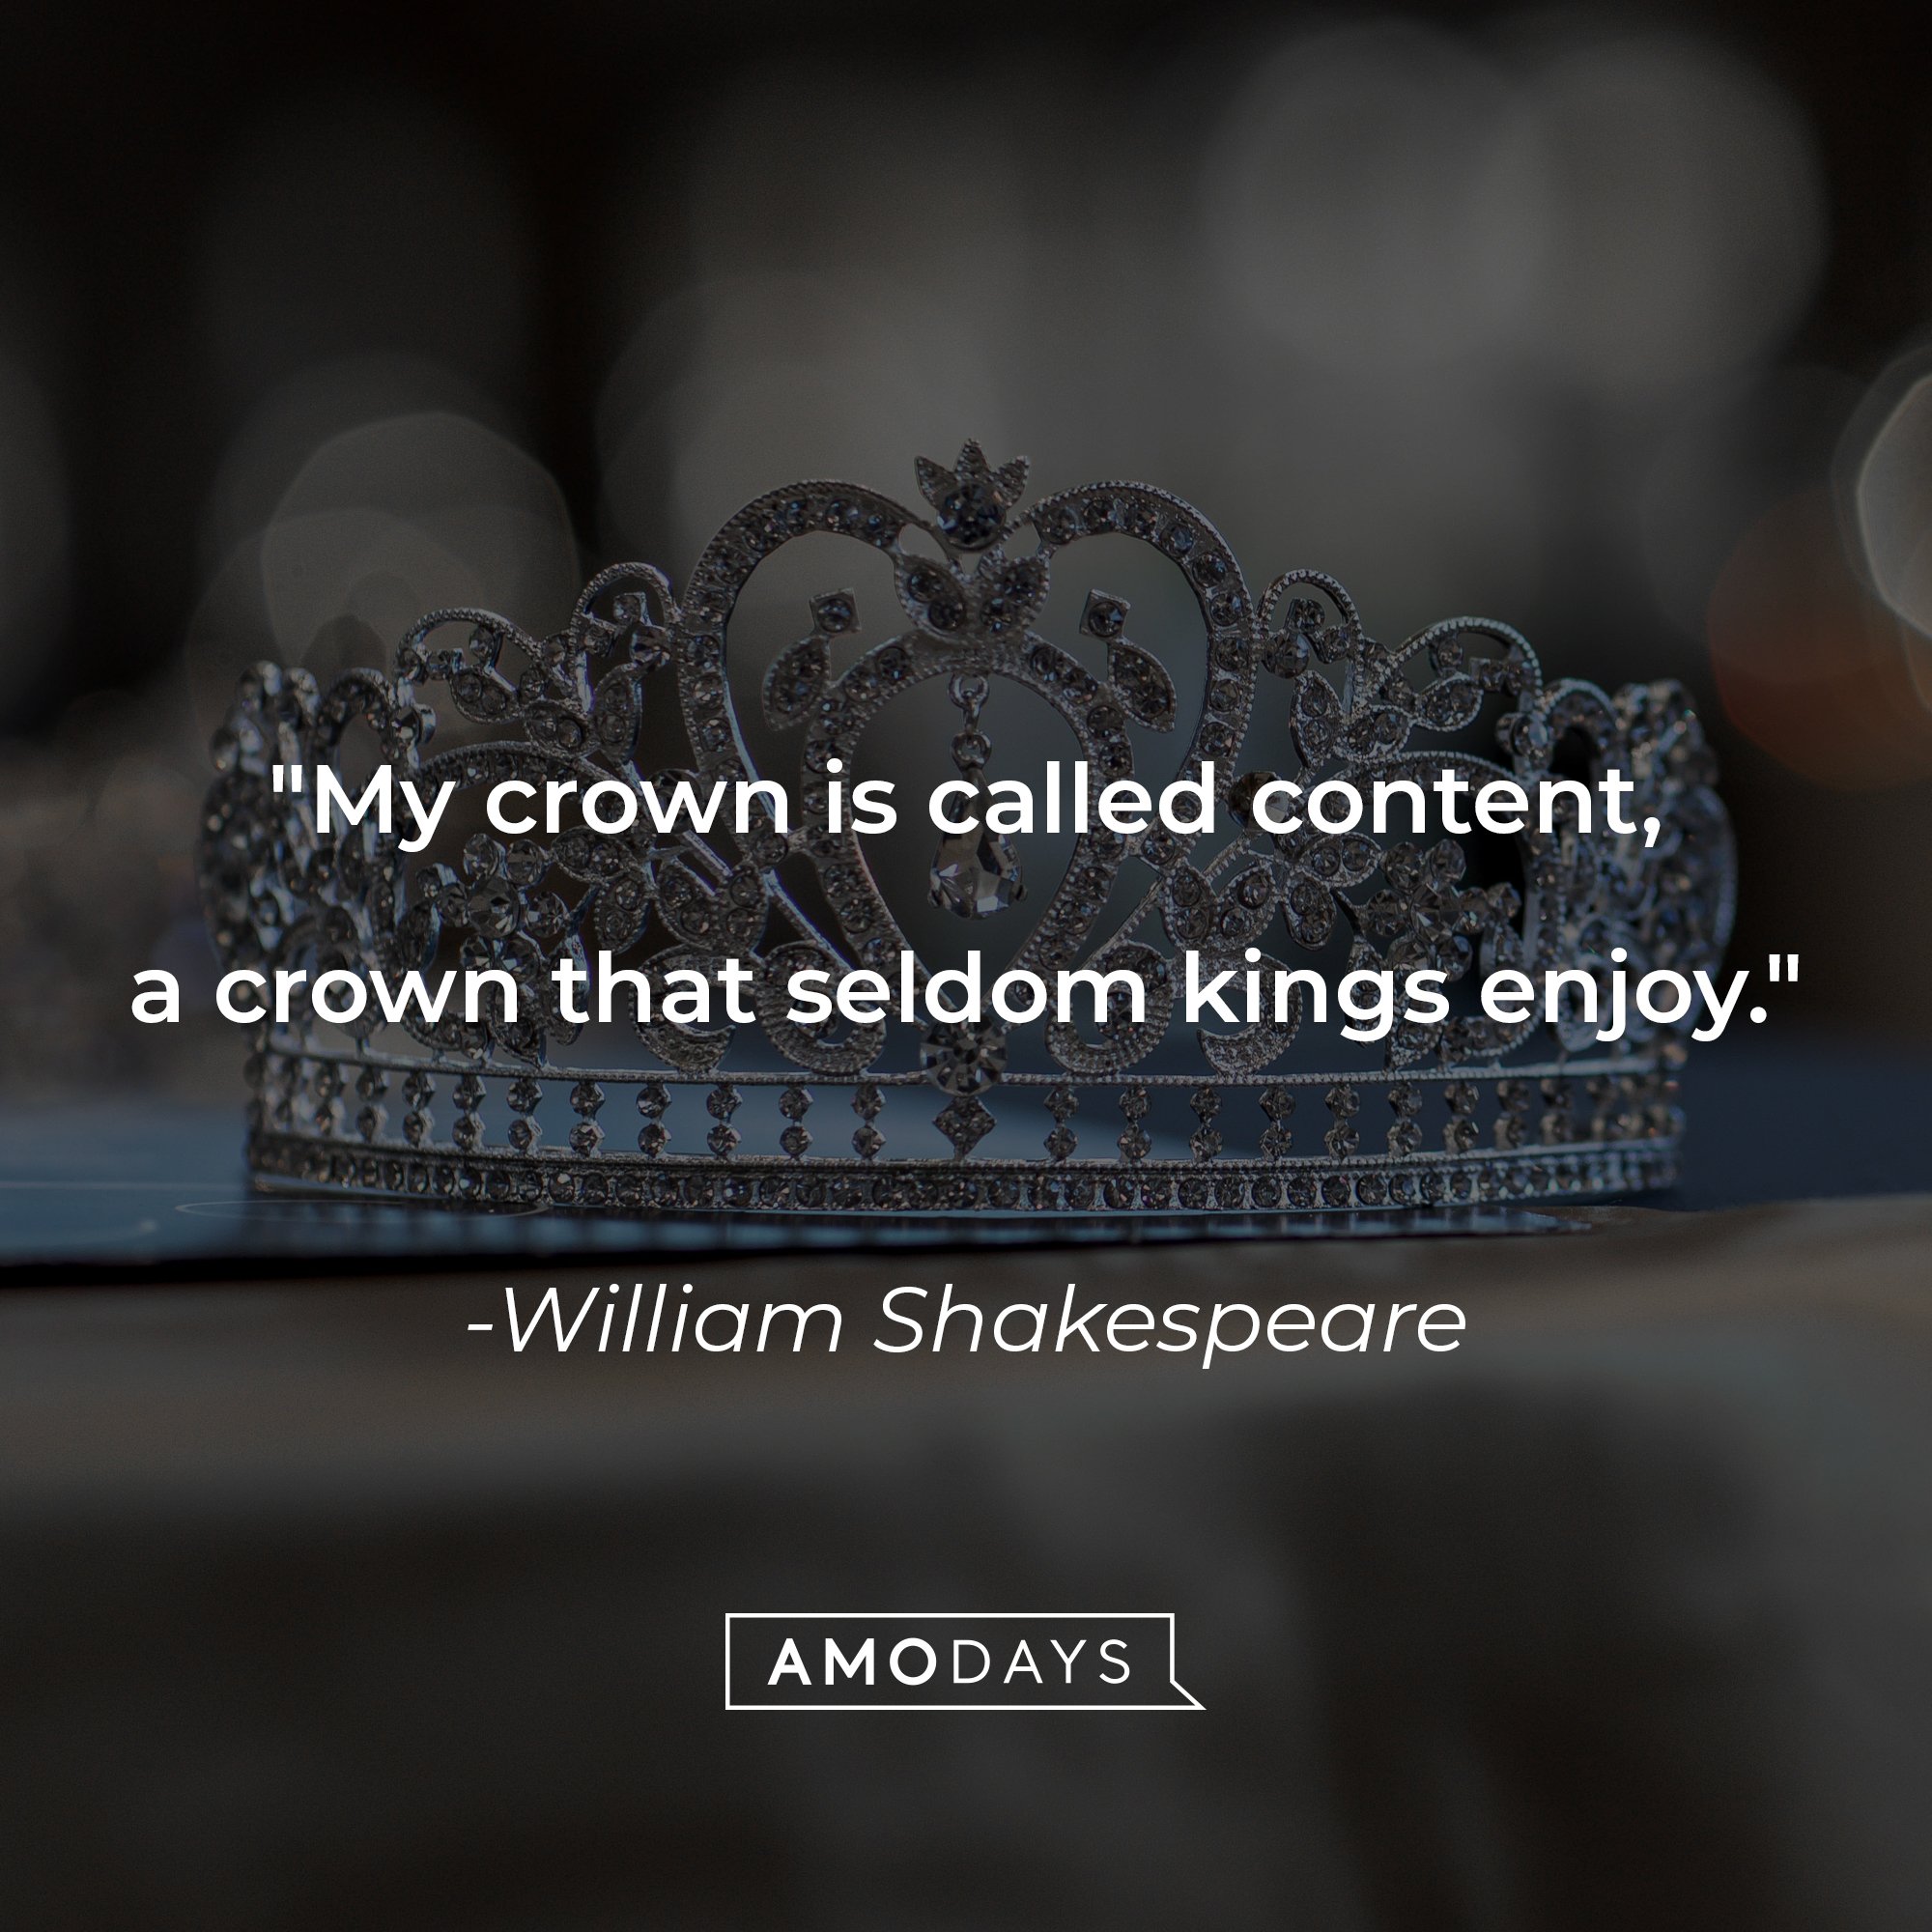 William Shakespeare's quote: "My crown is called content, a crown that seldom kings enjoy." | Image: AmoDays